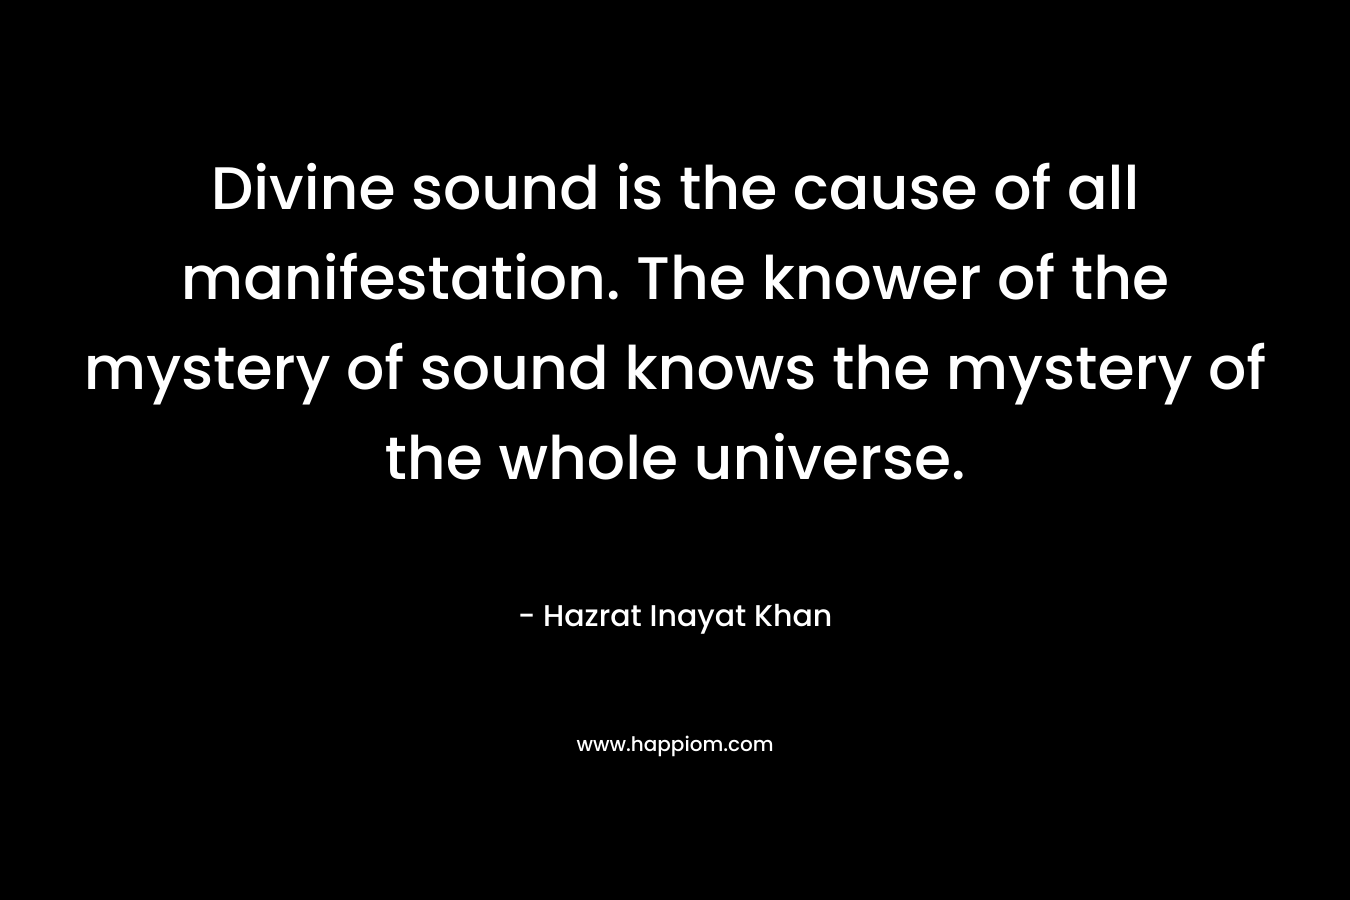 Divine sound is the cause of all manifestation. The knower of the mystery of sound knows the mystery of the whole universe. – Hazrat Inayat Khan